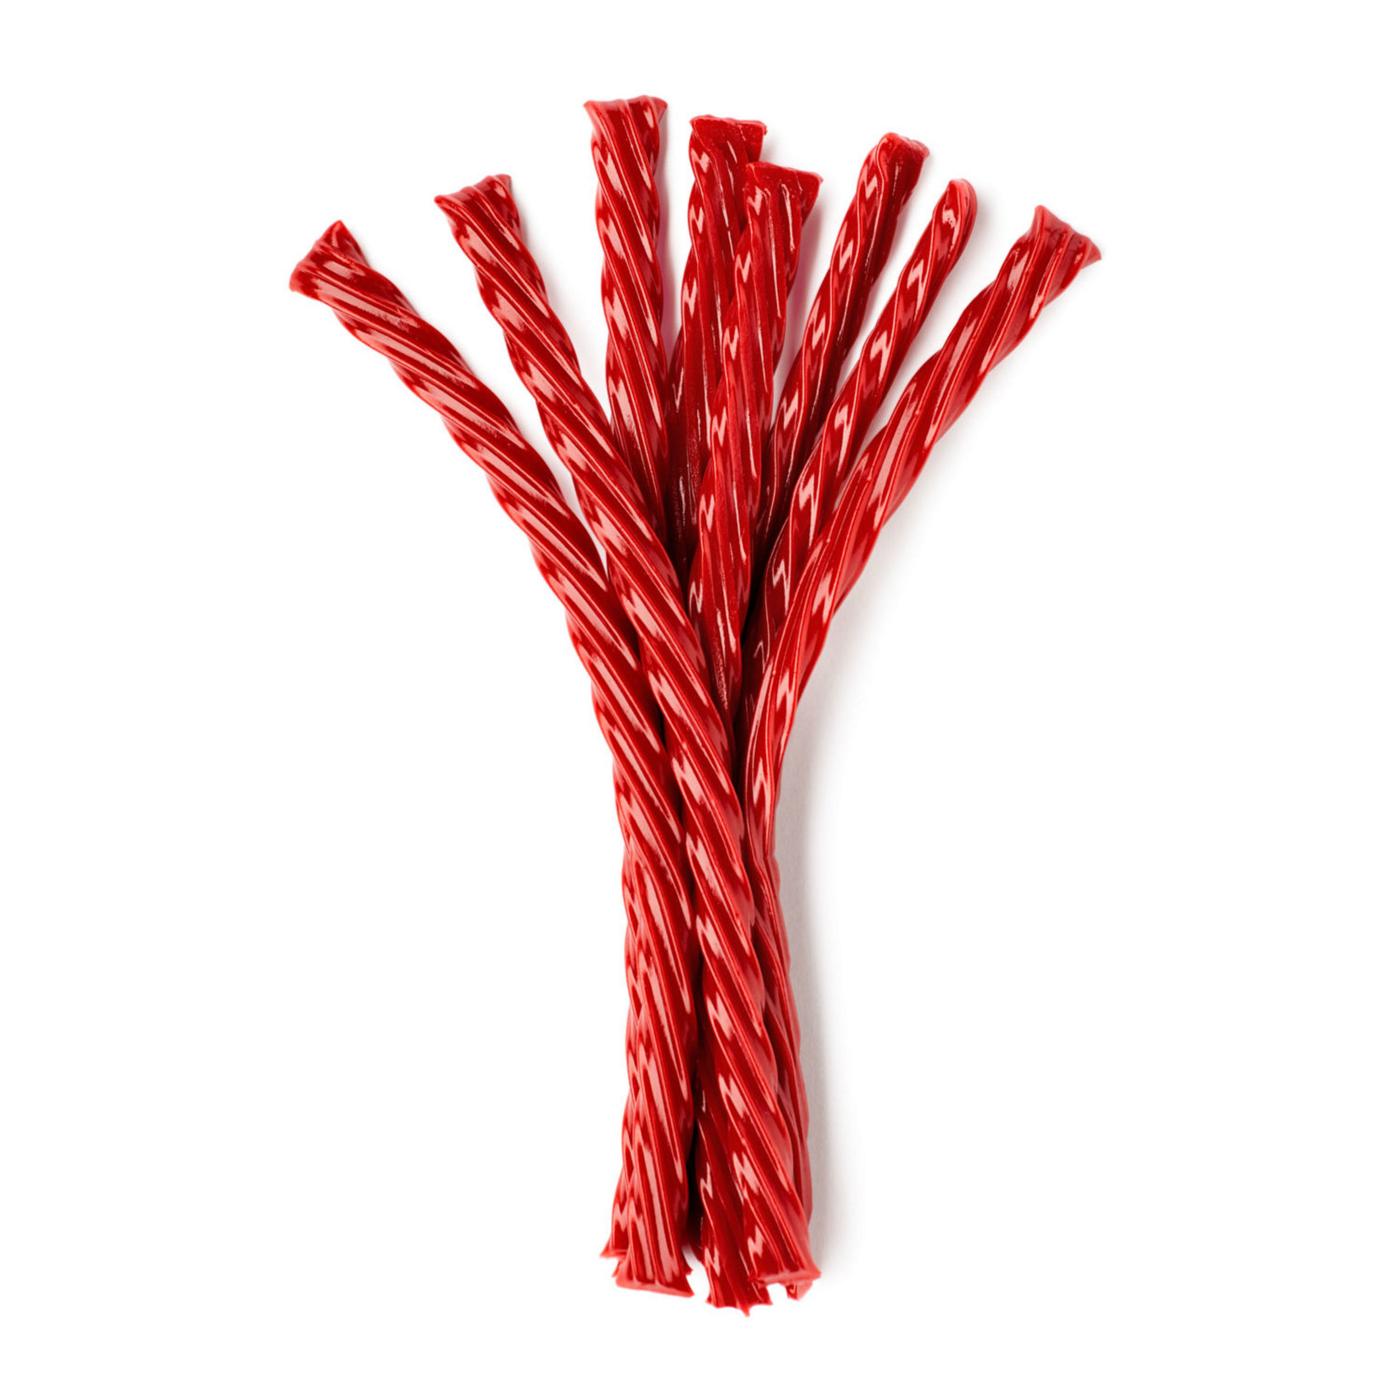 Twizzlers Twists Strawberry Flavored Chewy Candy; image 6 of 6